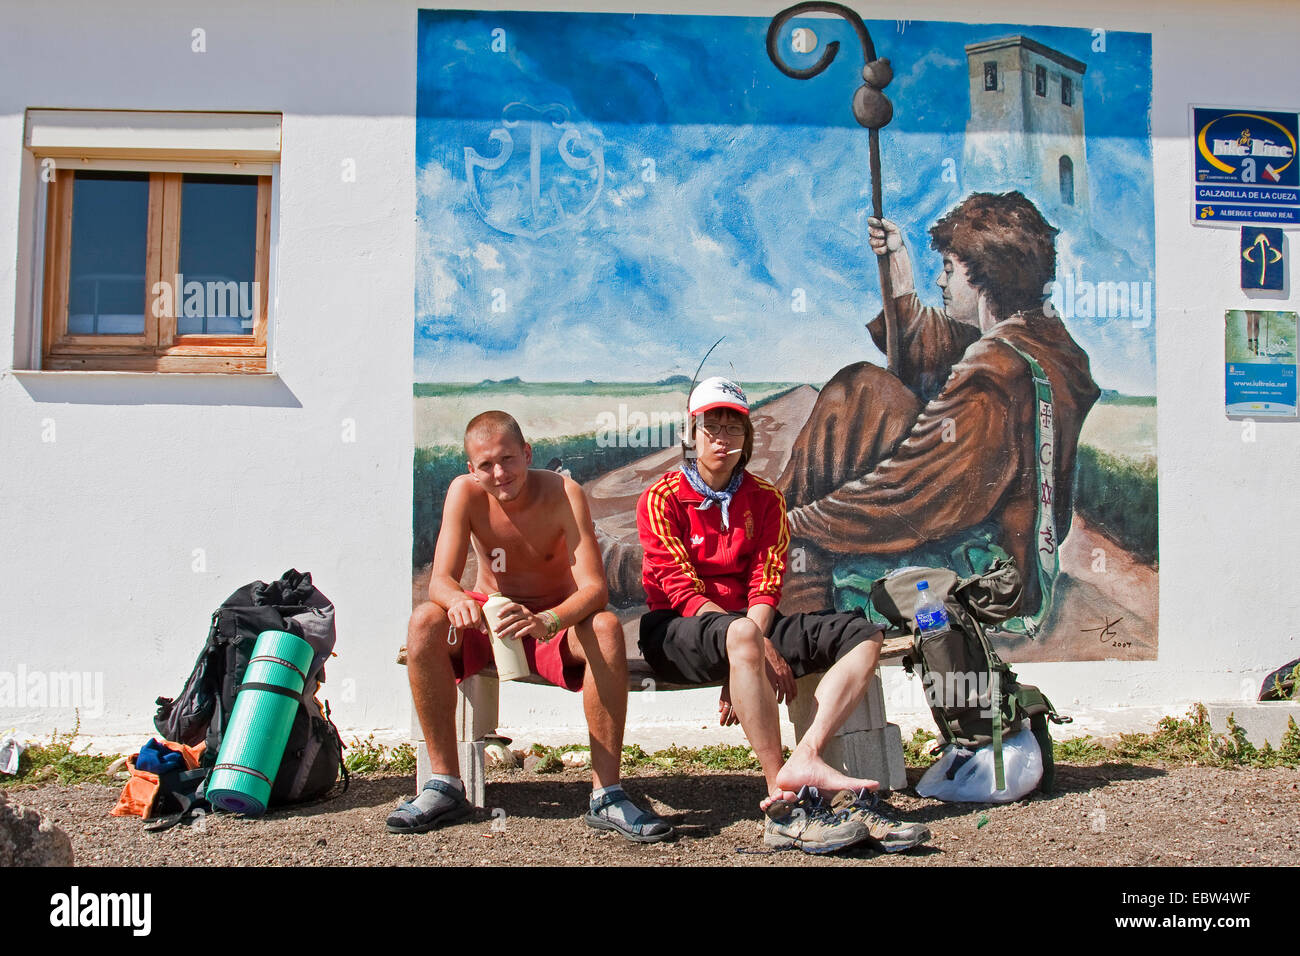 two young pilgrims in front of a mural painting, Spain, Kastilien & Le¾n, Palencia, Calzadilla de la Cueza Stock Photo